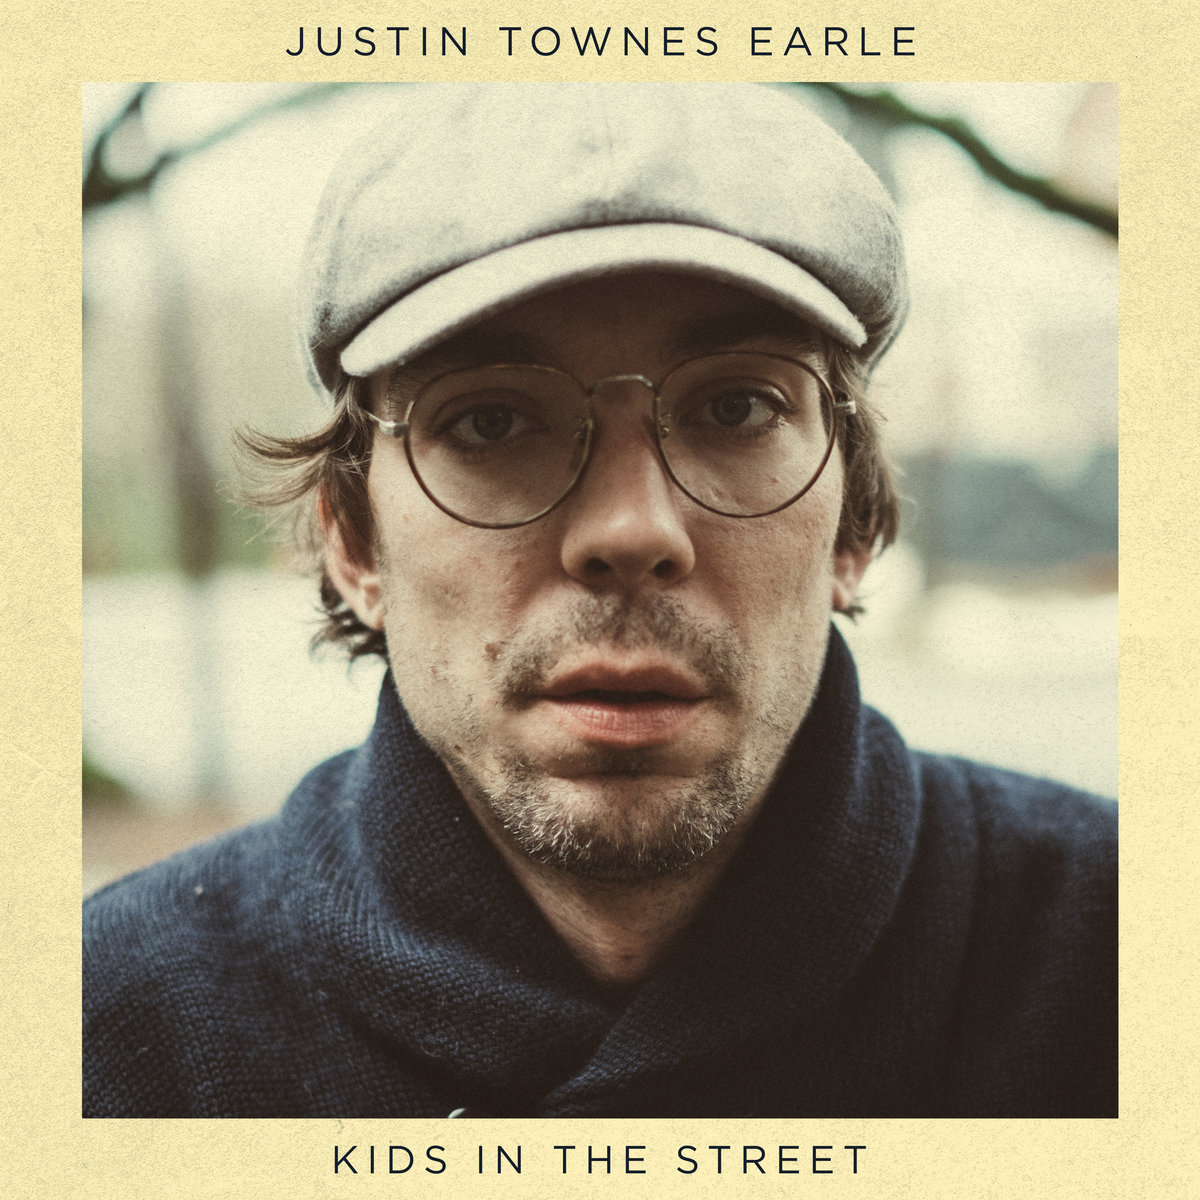 Justin Townes Earle, Kids in the Street - cover art